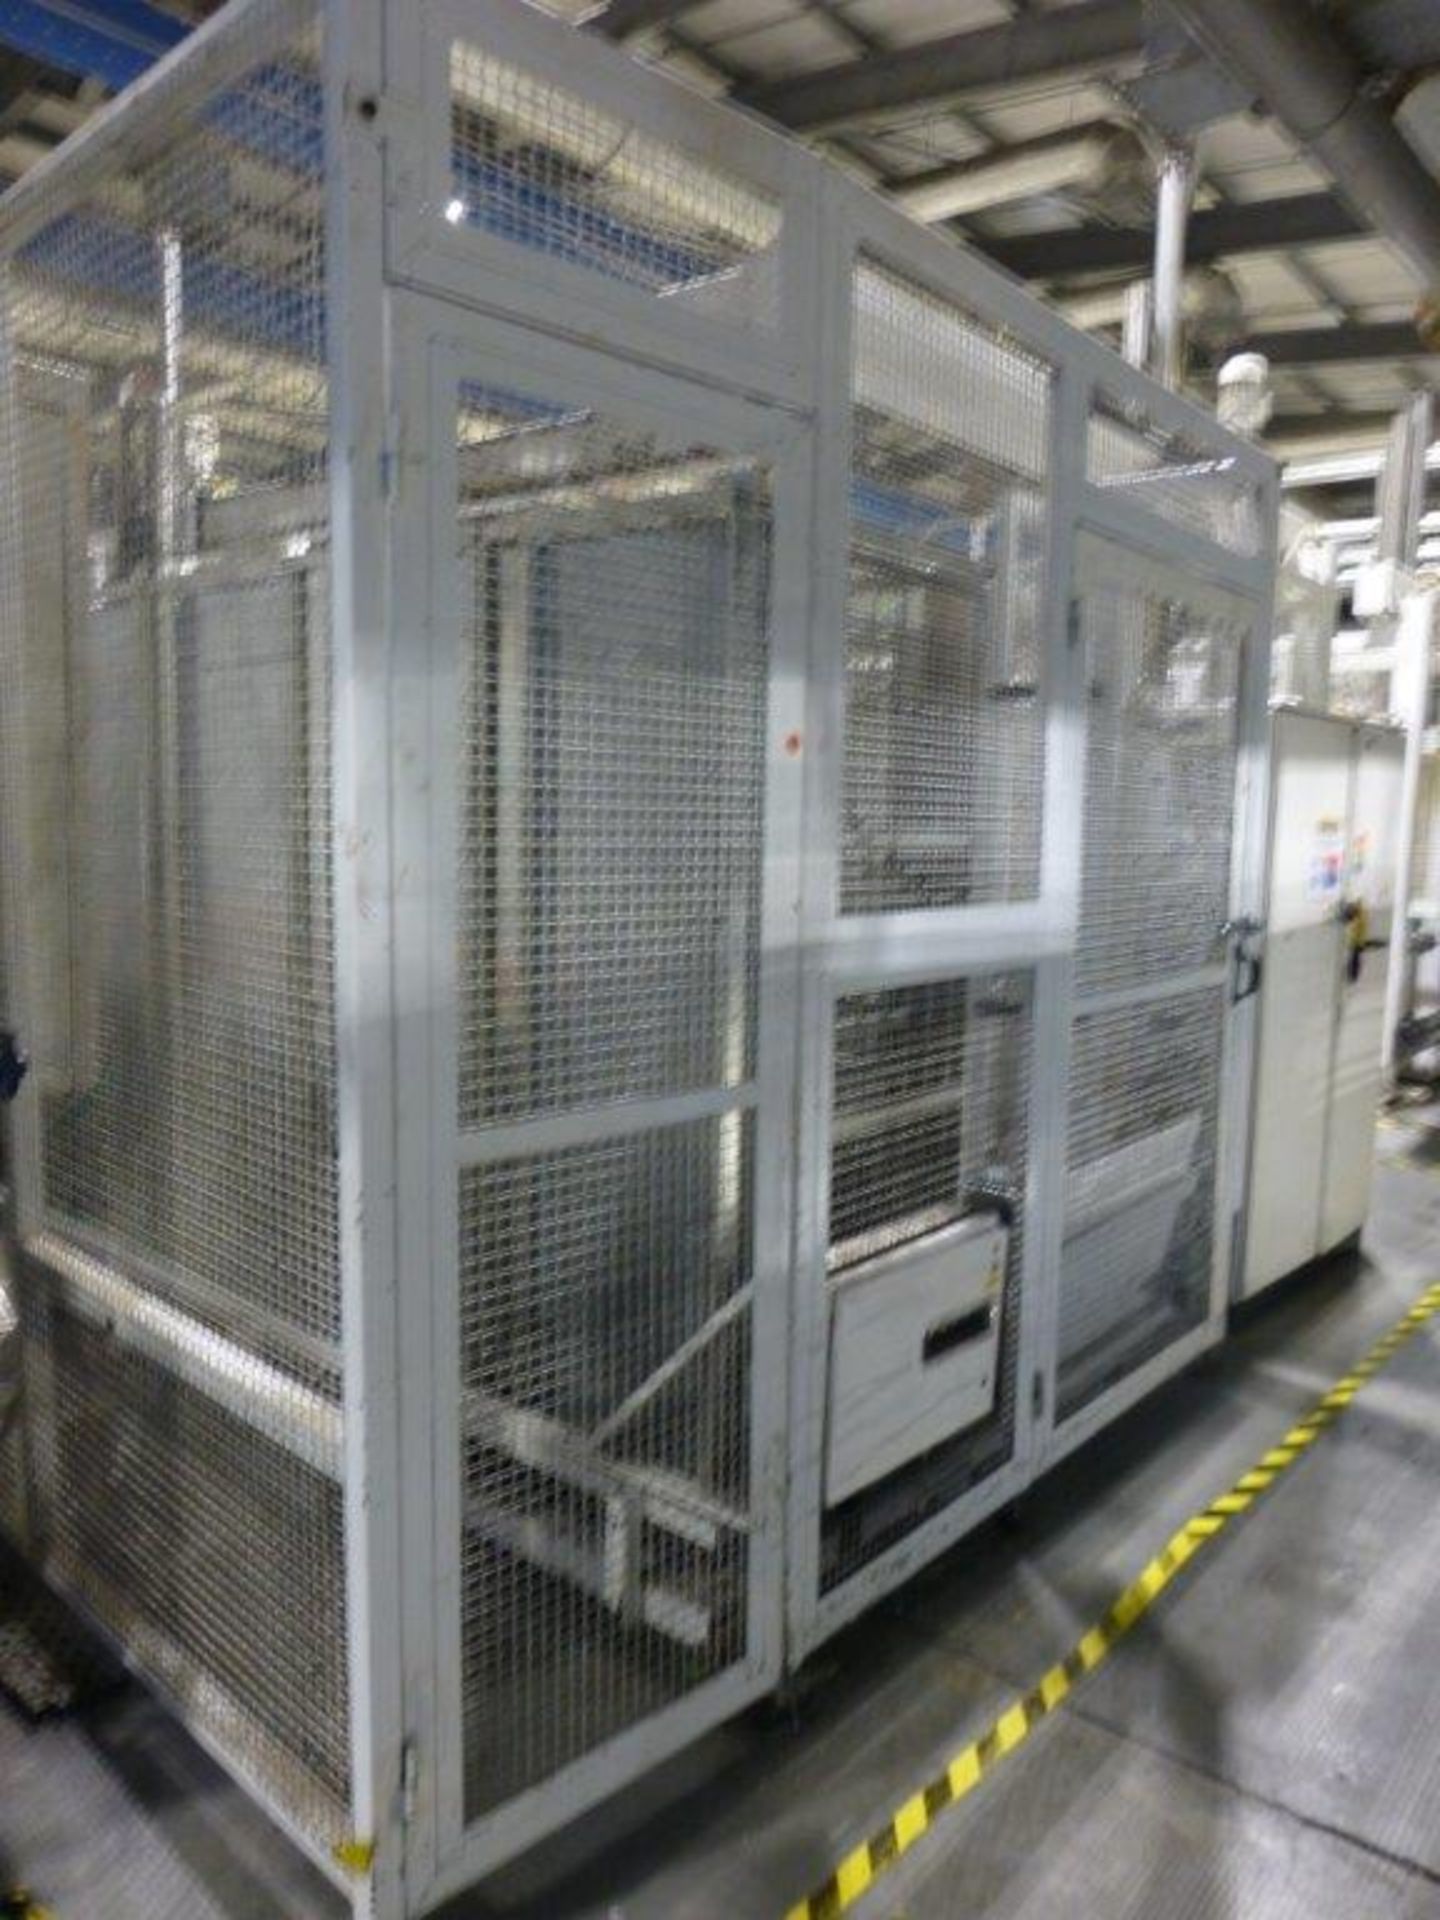 GMAT Model M53 CNC automated DVD case twin arm picking/stacking system with case closure unit, - Bild 7 aus 8